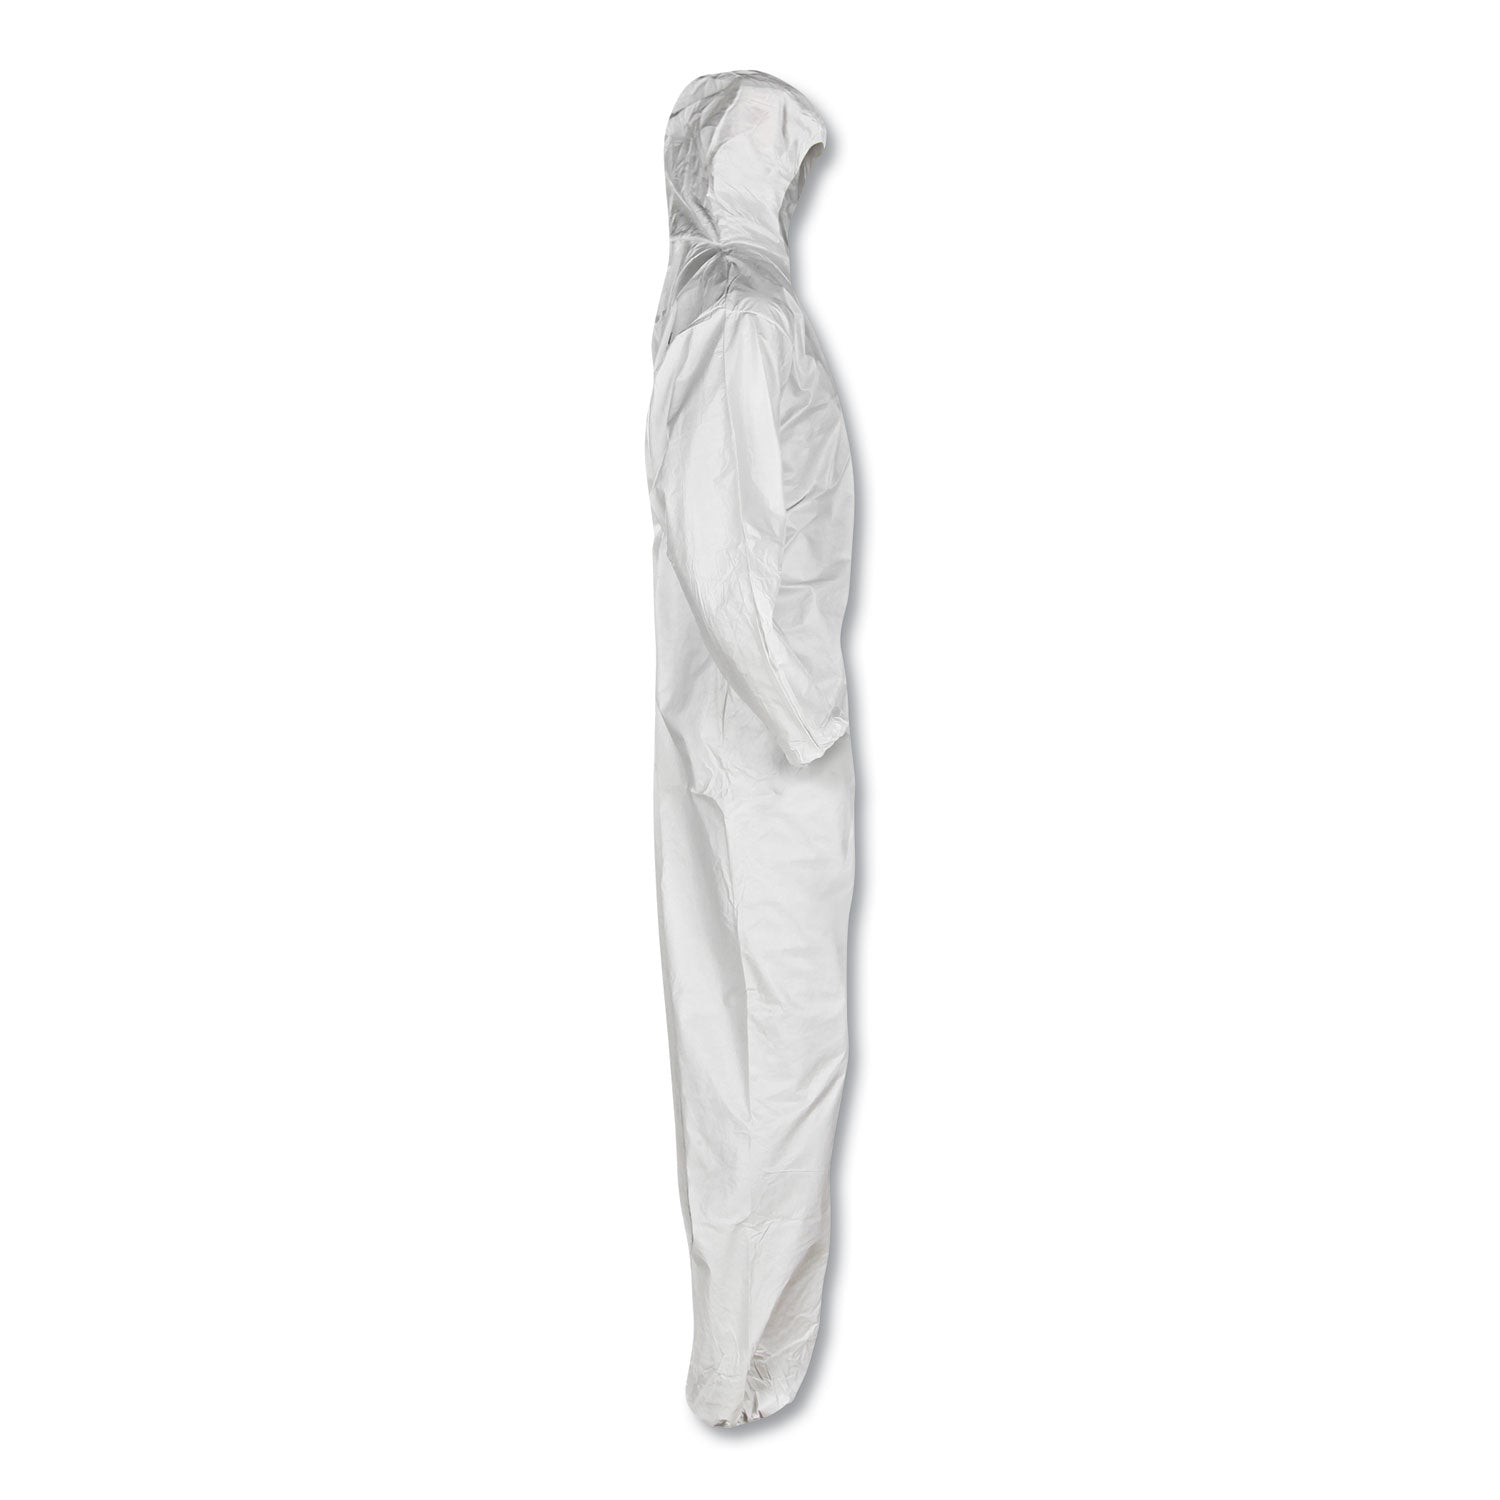 a20-breathable-particle-protection-coveralls-zip-closure-3x-large-white_kcc49116 - 5